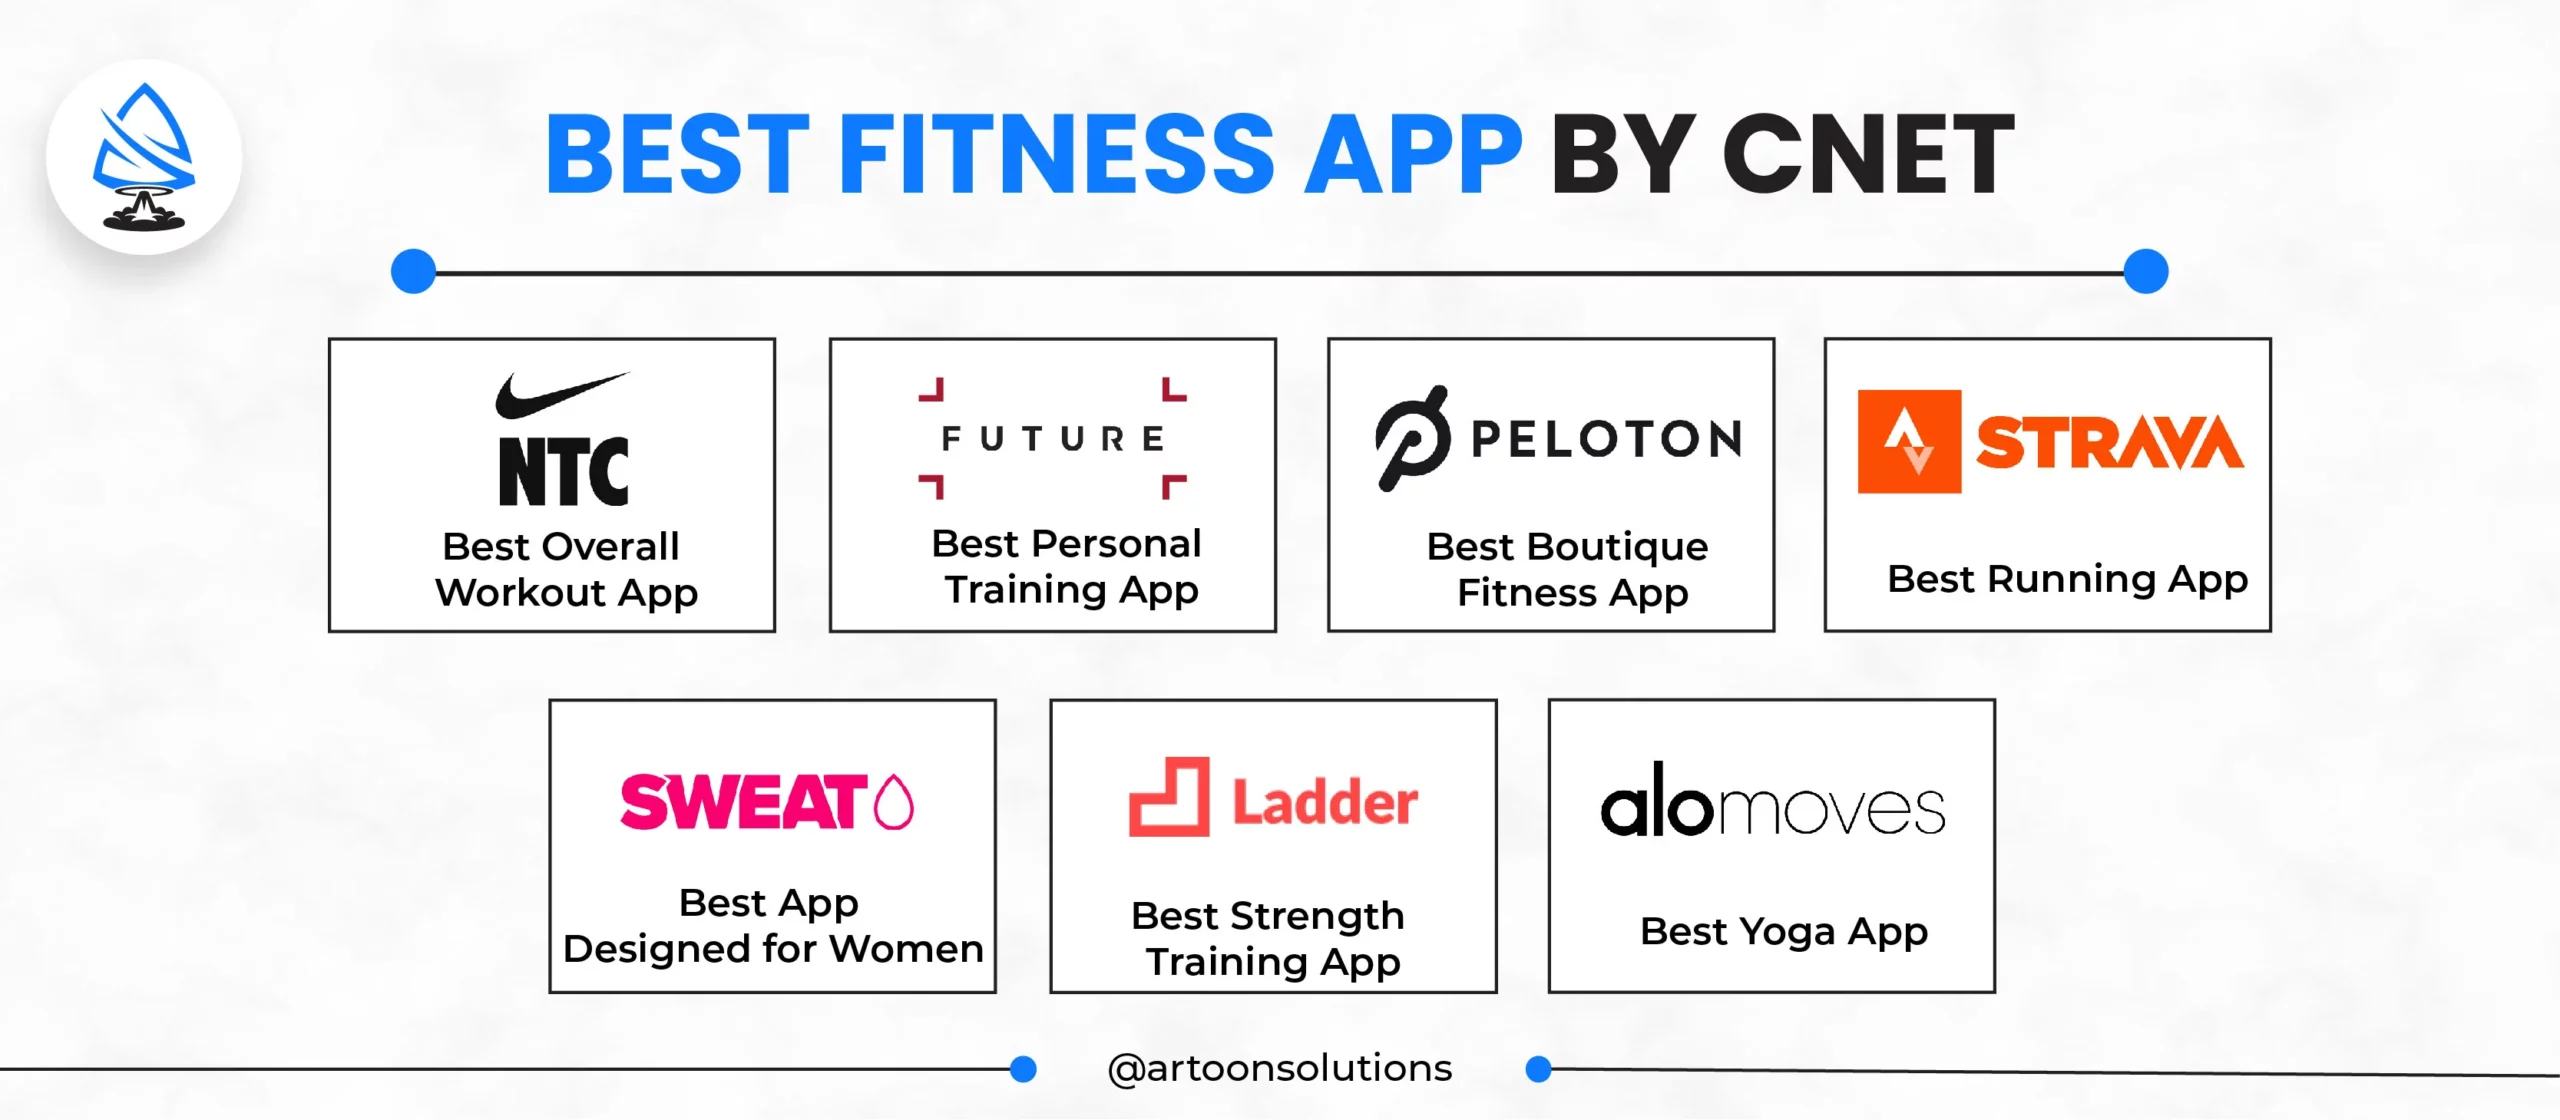 Best Fitness Apps for Cnet